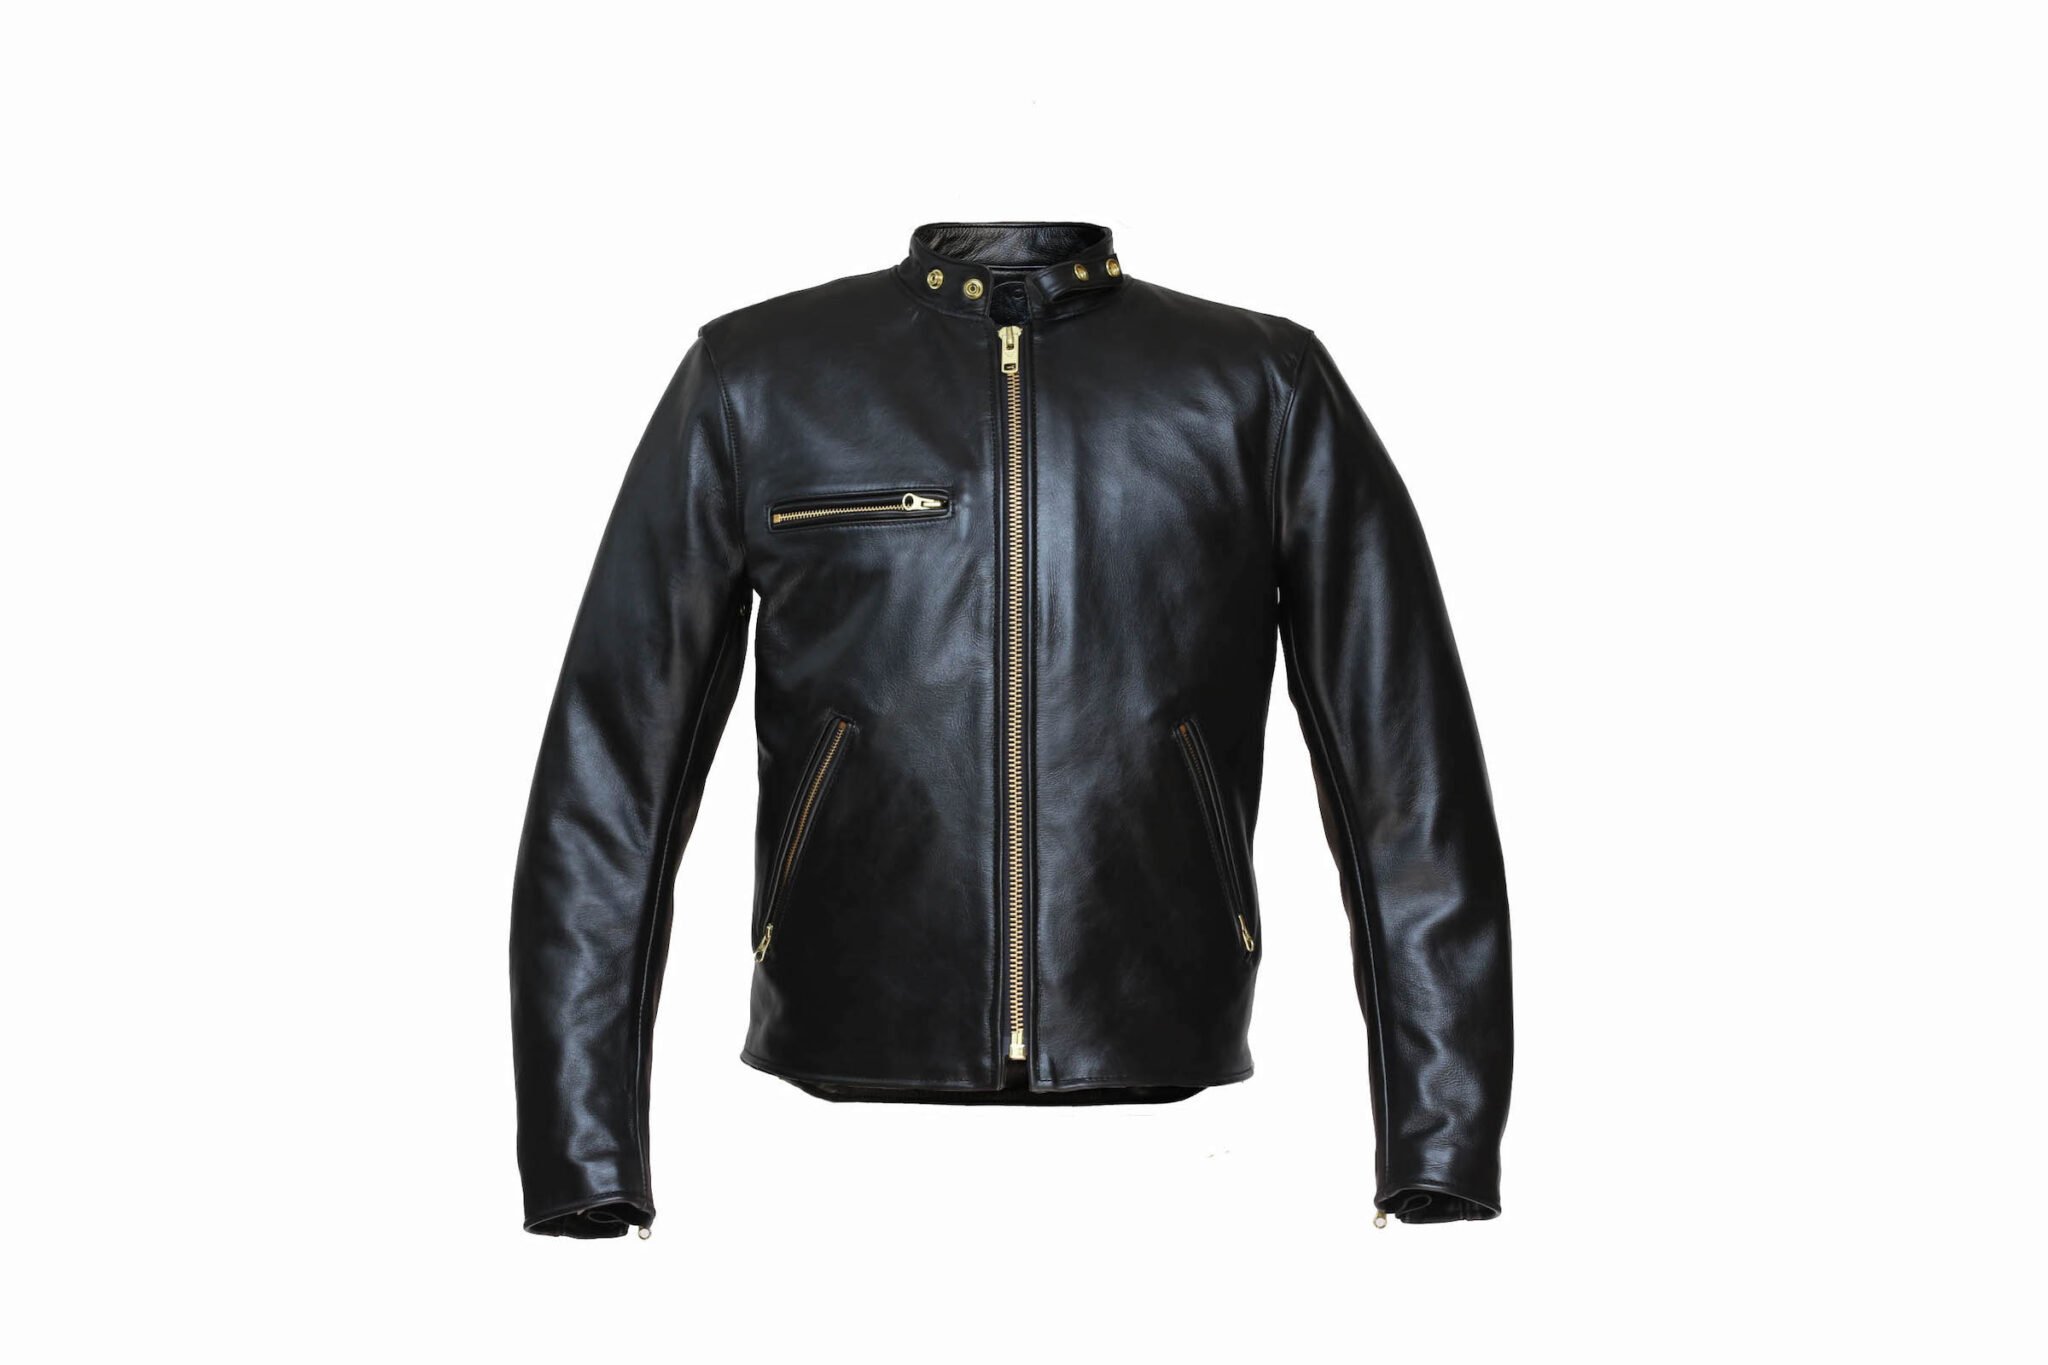 Union Garage V7 Jacket - A Classically Styled Armored Motorcycle Jacket